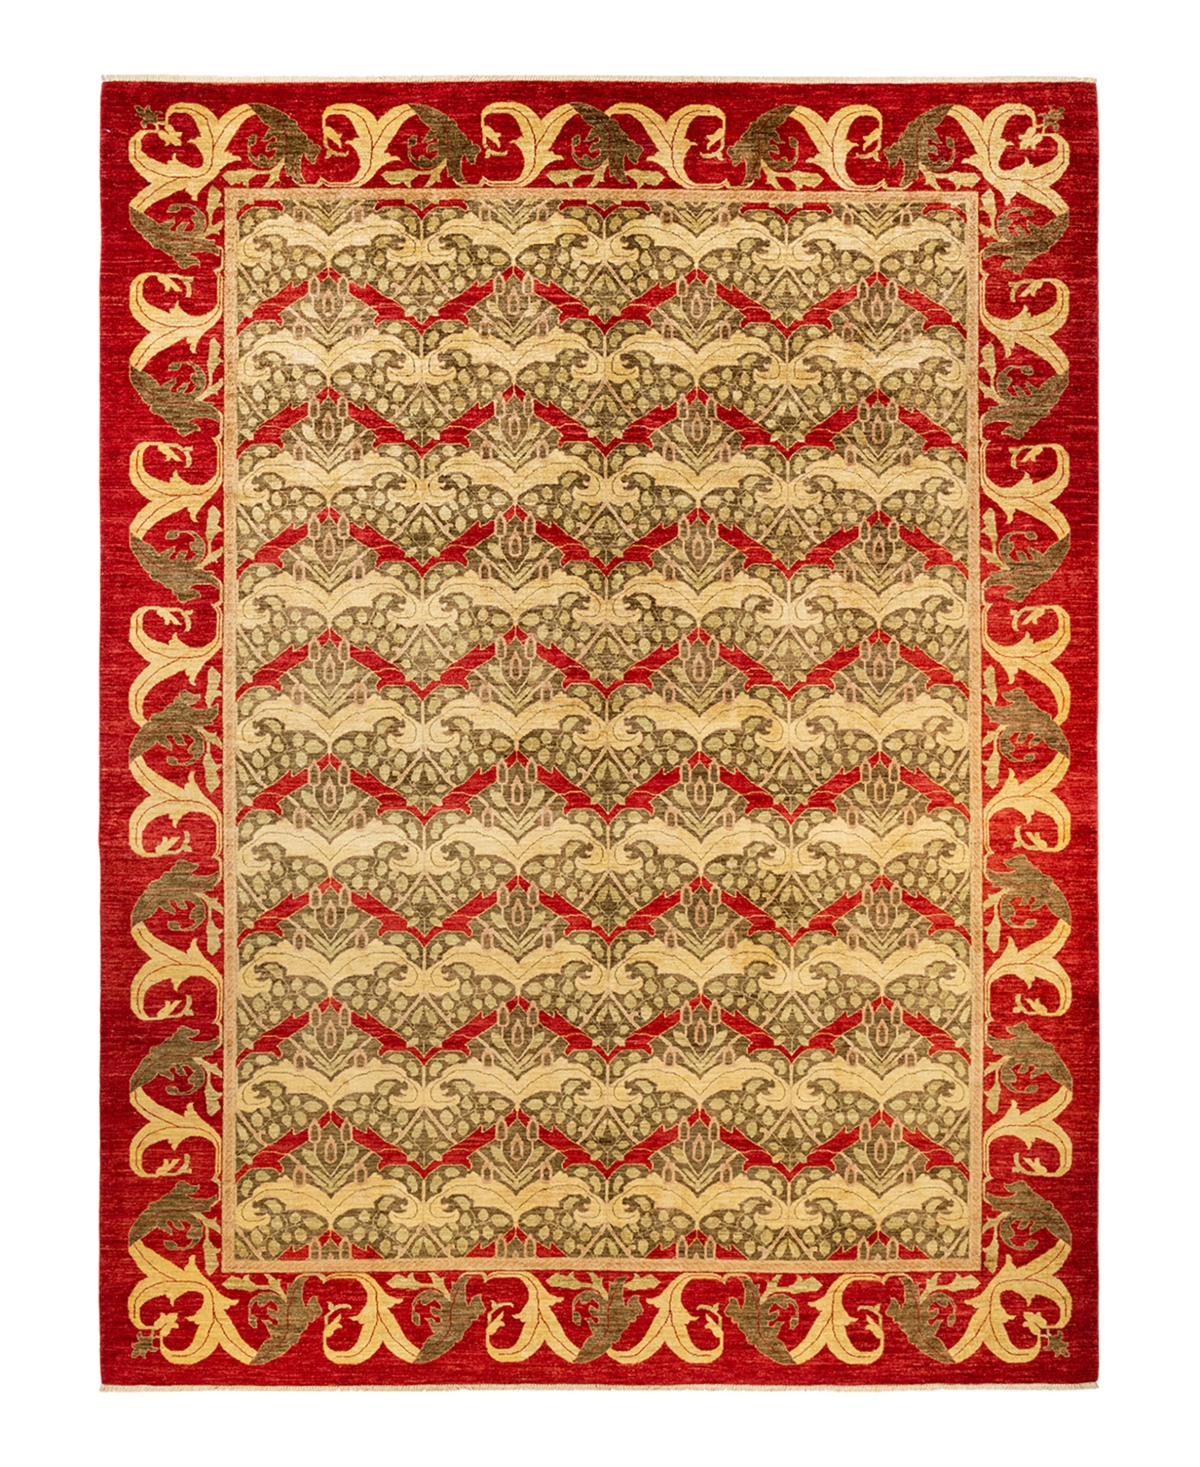 Adorn Hand Woven Rugs Arts Crafts M1601 10'2in x 13'9in Area Rug - Red